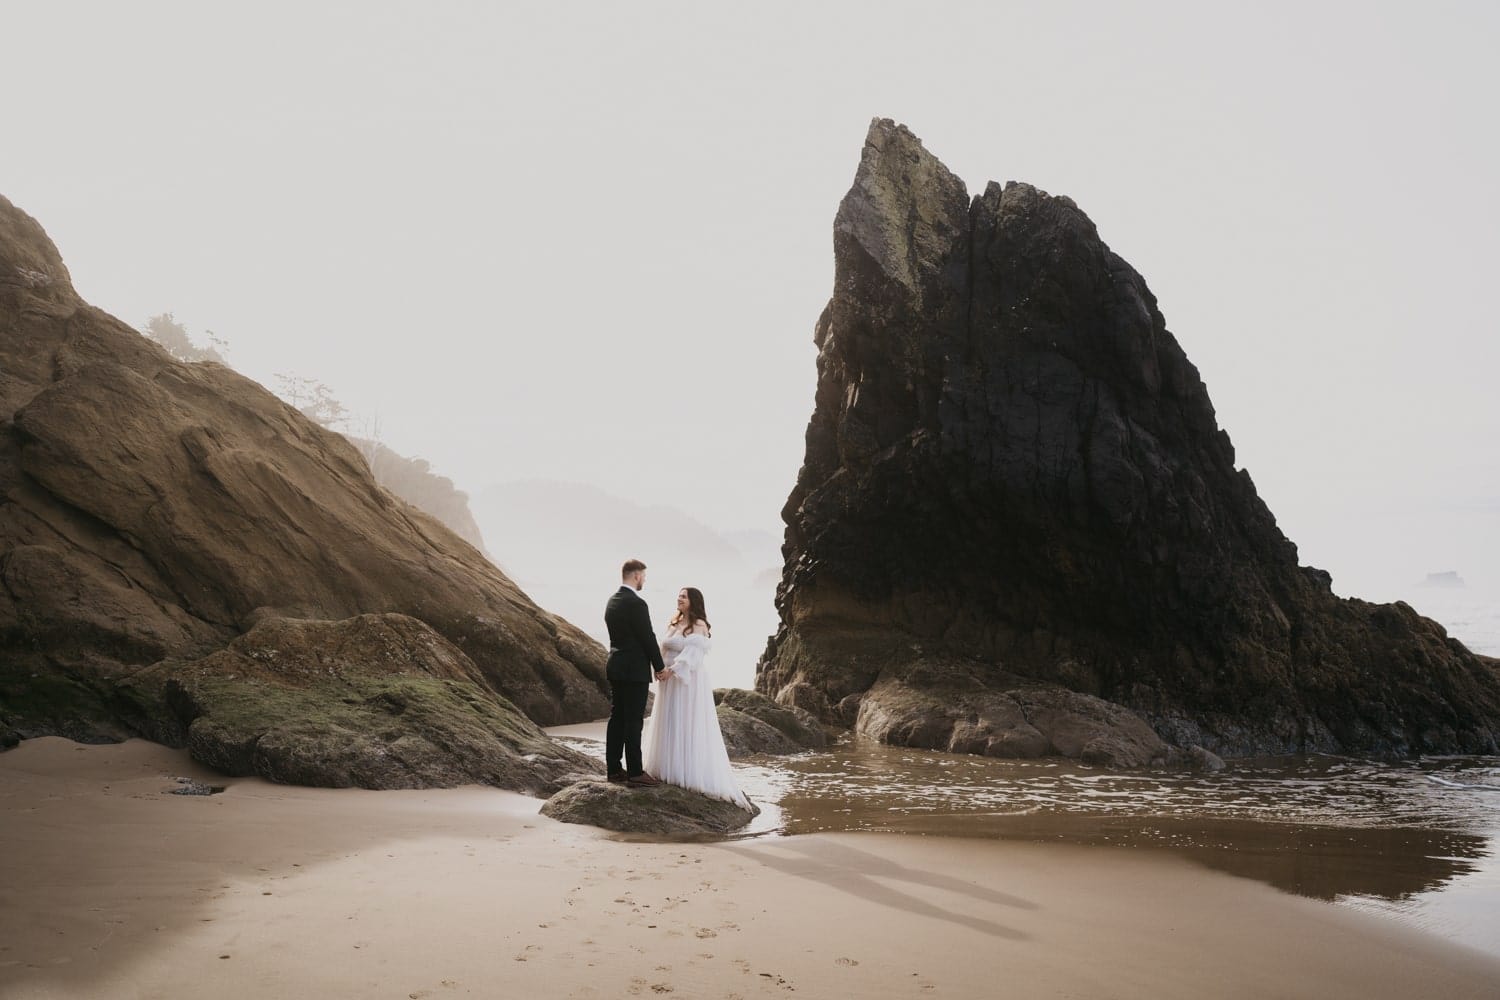 A landscape photo showing a bride and groom standing together between the rocks at Hug Point near Cannon Beach.